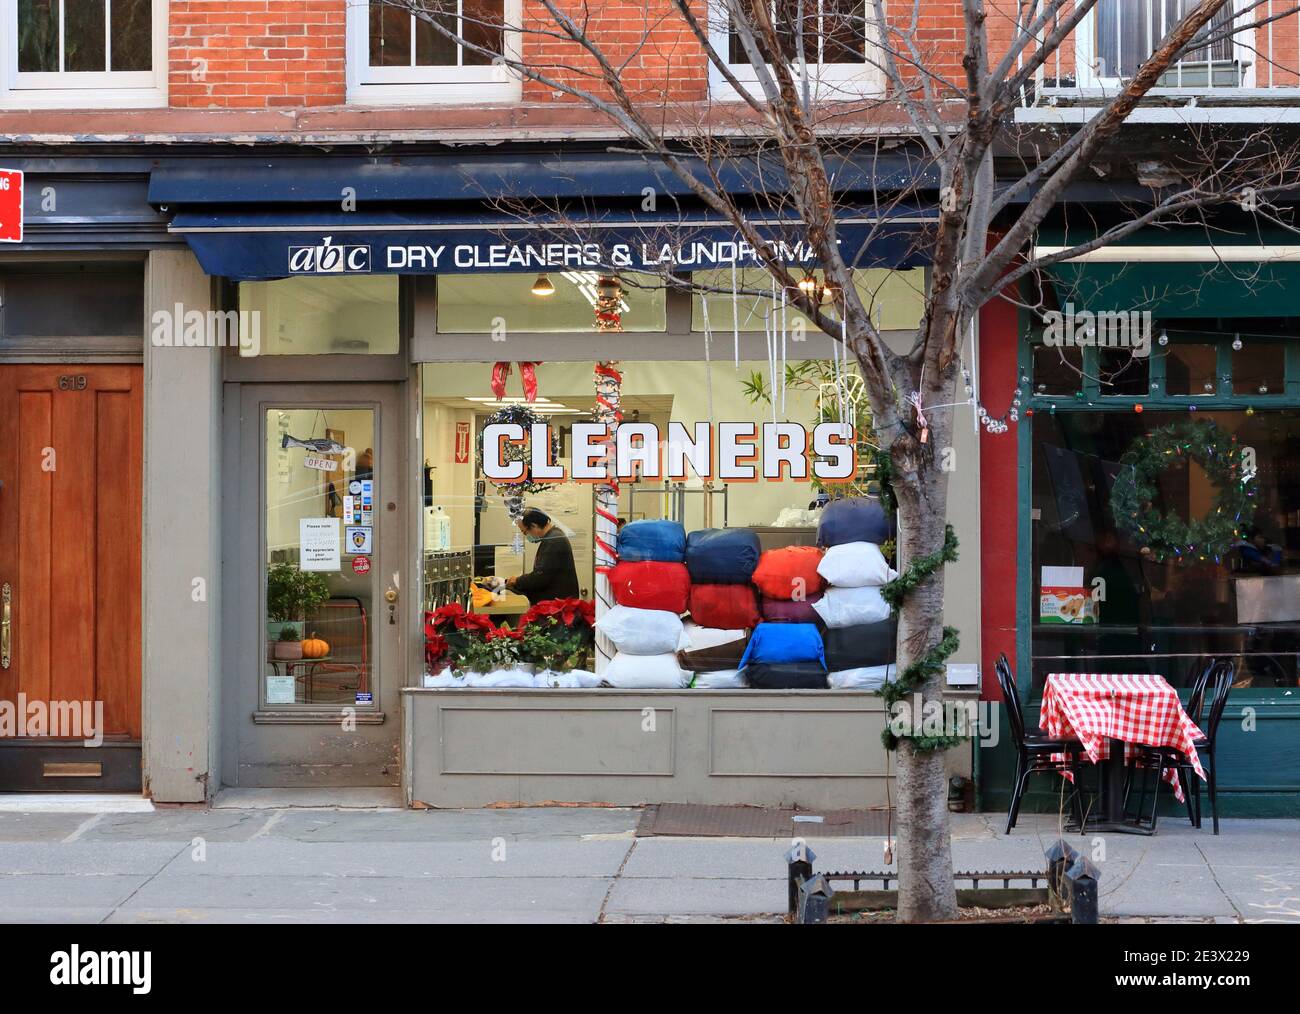 ABC Dry Cleaners & Laundromat, 619 Hudson St, New York, NY. exterior storefront of a dry cleaner in Manhattan's West Village neighborhood. Stock Photo